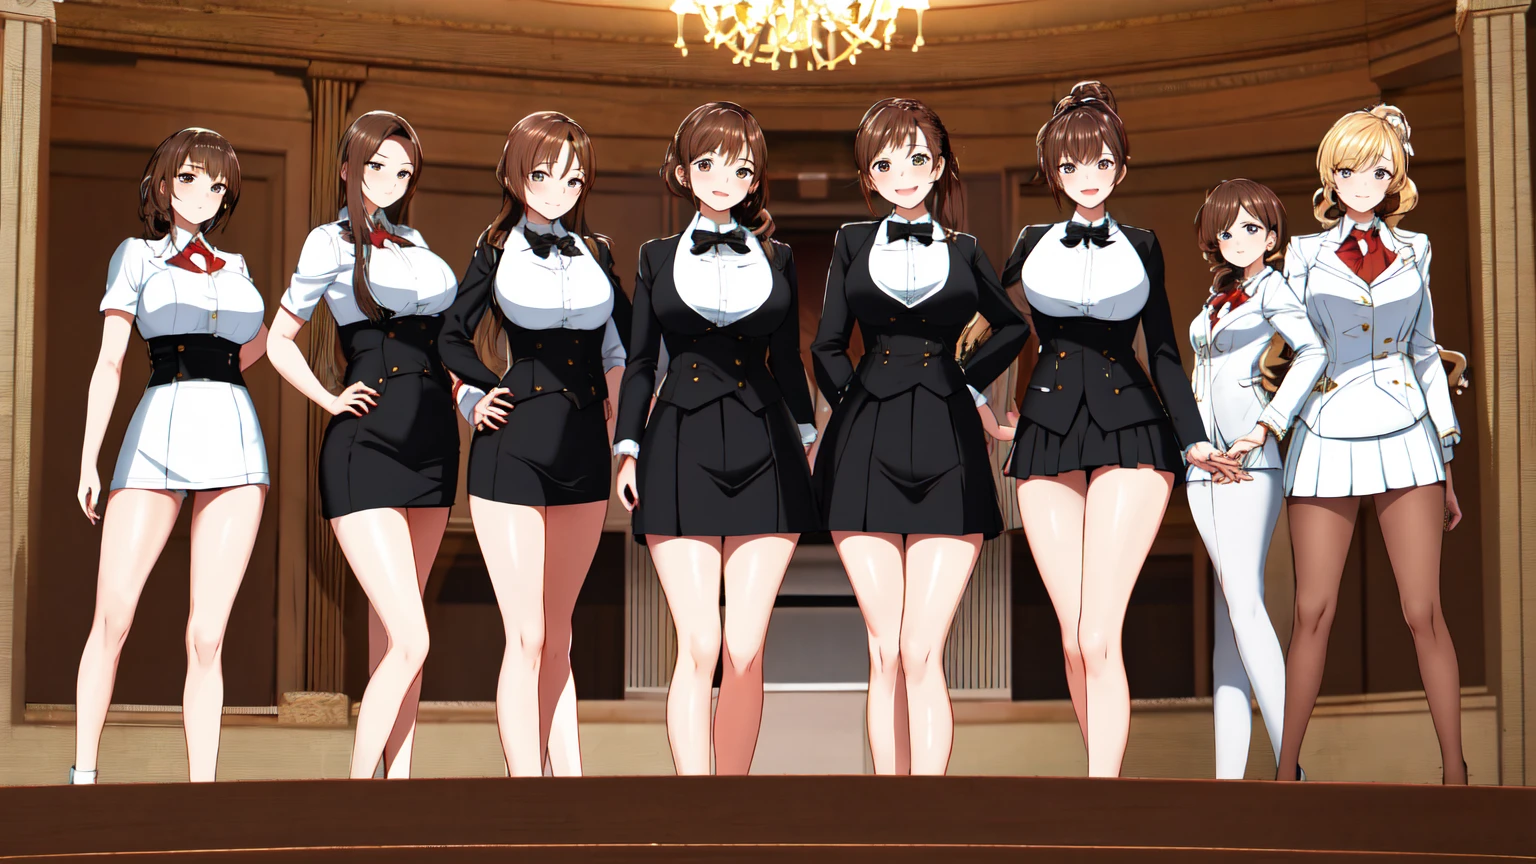 masterpiece, highest quality, High resolution, 10+girl, crowd, Identical sister, clone, An orderly line of sisters, An orderly line of sisters, Sisters standing in a line, uniform, Matching outfits, Long Hair, Curly Hair, ponytail, Matching hairstyle, Hazel Eyes, Brown Hair, Black tie, Blue ribbon, Brown Skirt, salute, smile, indoor, Group shot, whole body, Panty shot, Black high heels